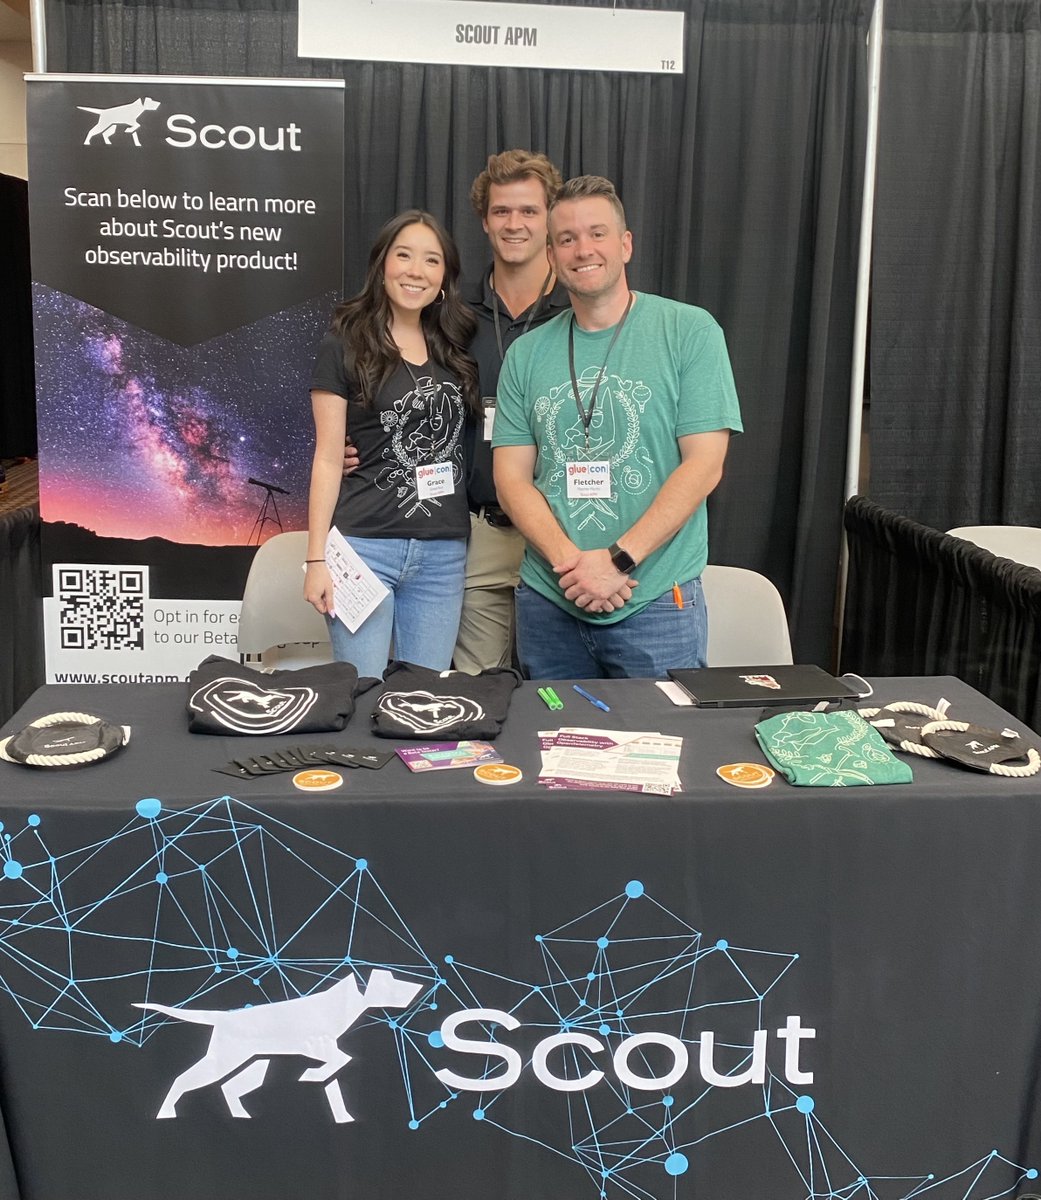 Stop by our booth at @gluecon for swag and information on observability! 

#gluecon2022 #opentelemetry #observabiilty